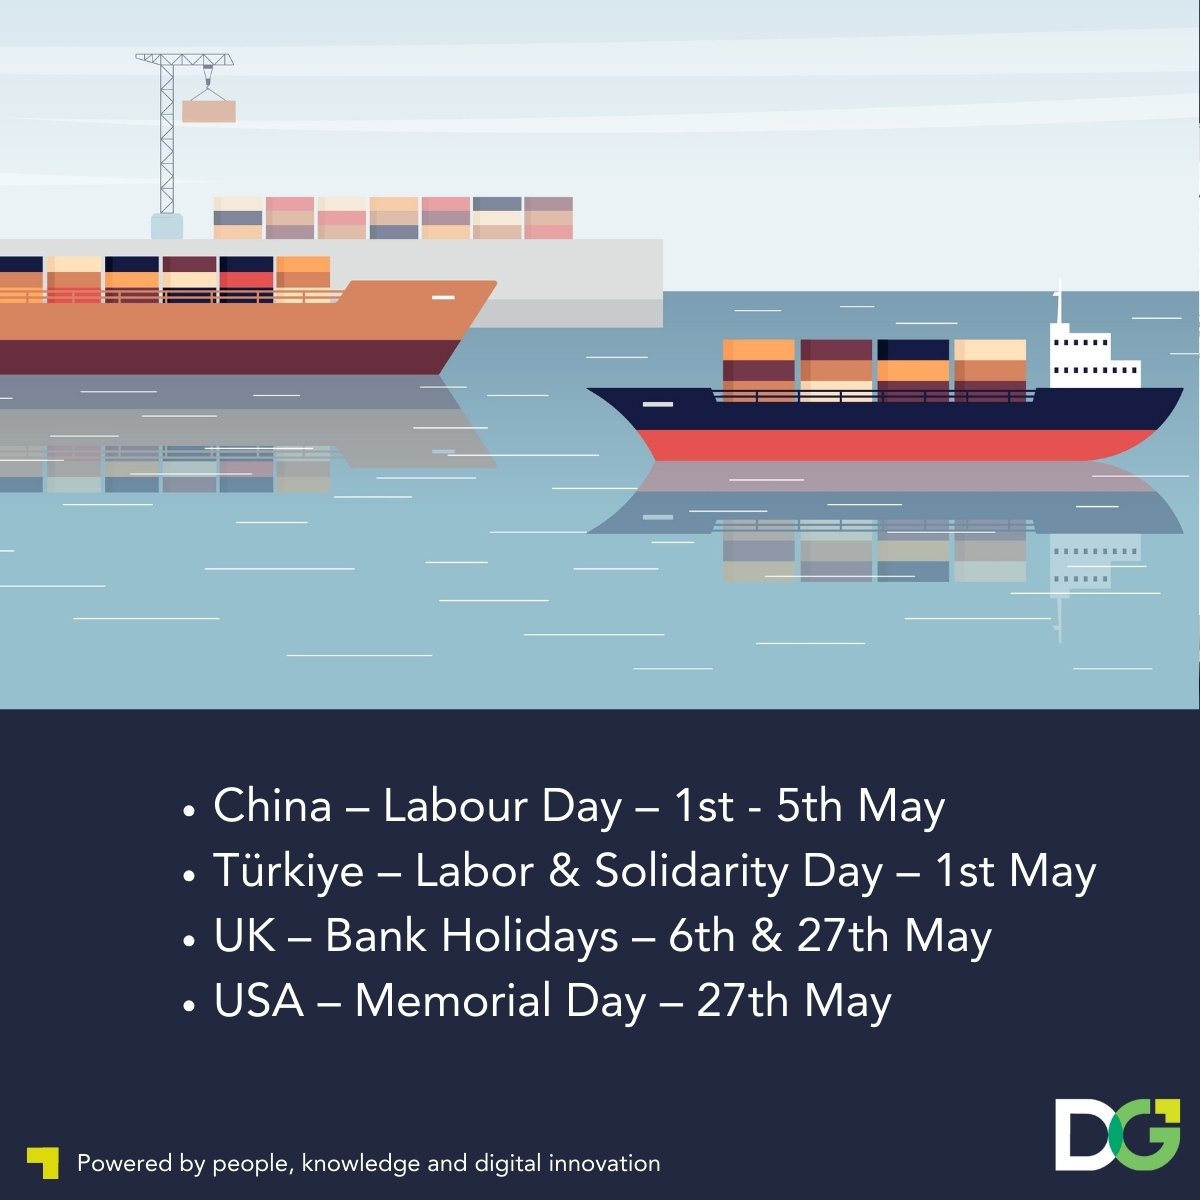 May is a busy month for national holidays, so ensure you plan your shipments. To make an early booking or find out if you’re shipments may be affected by the below dates, contact us today. bit.ly/3xBWHZk #labourday #labourandsolidarityday #bankholiday #memorialday